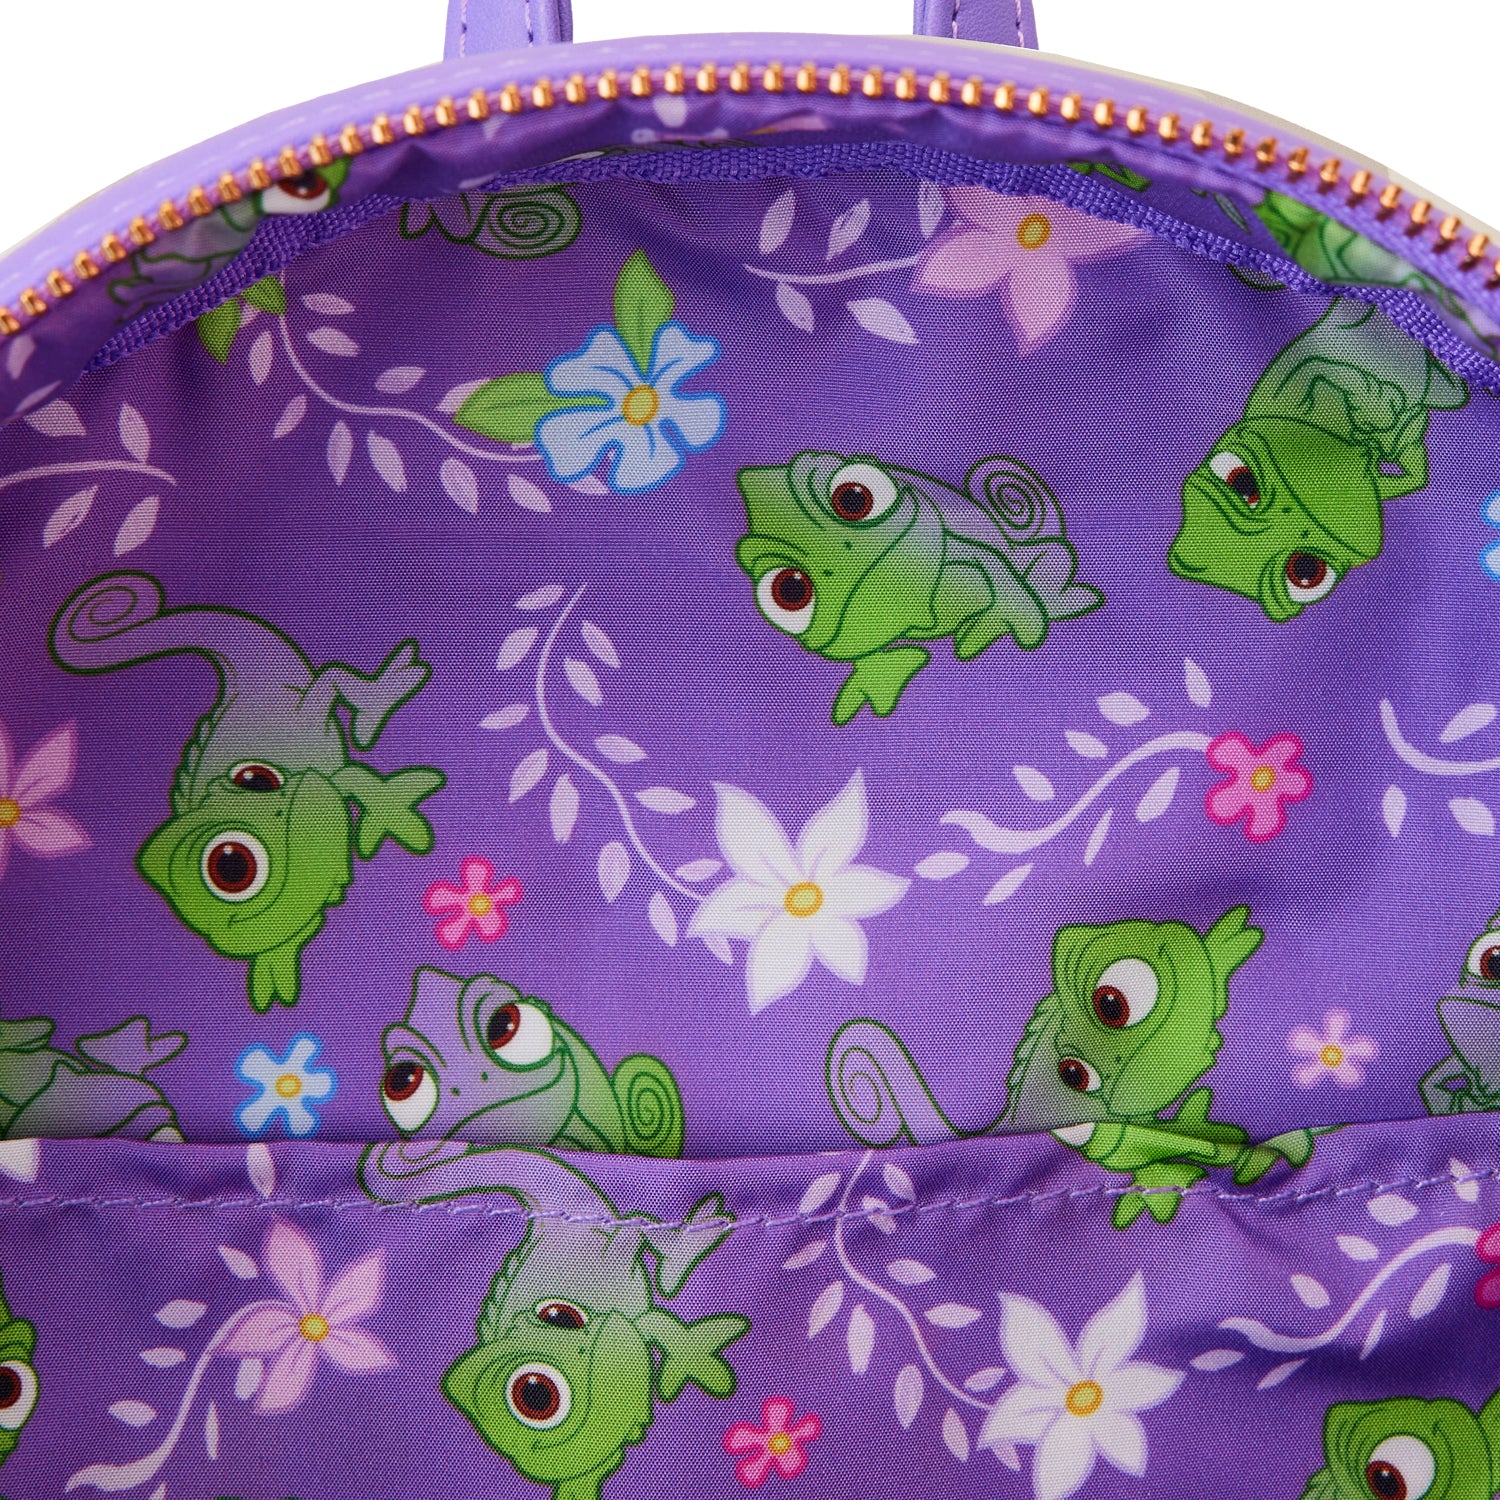 Loungefly x Disney Tangled Rapunzel Swinging From Tower Mini Backpack